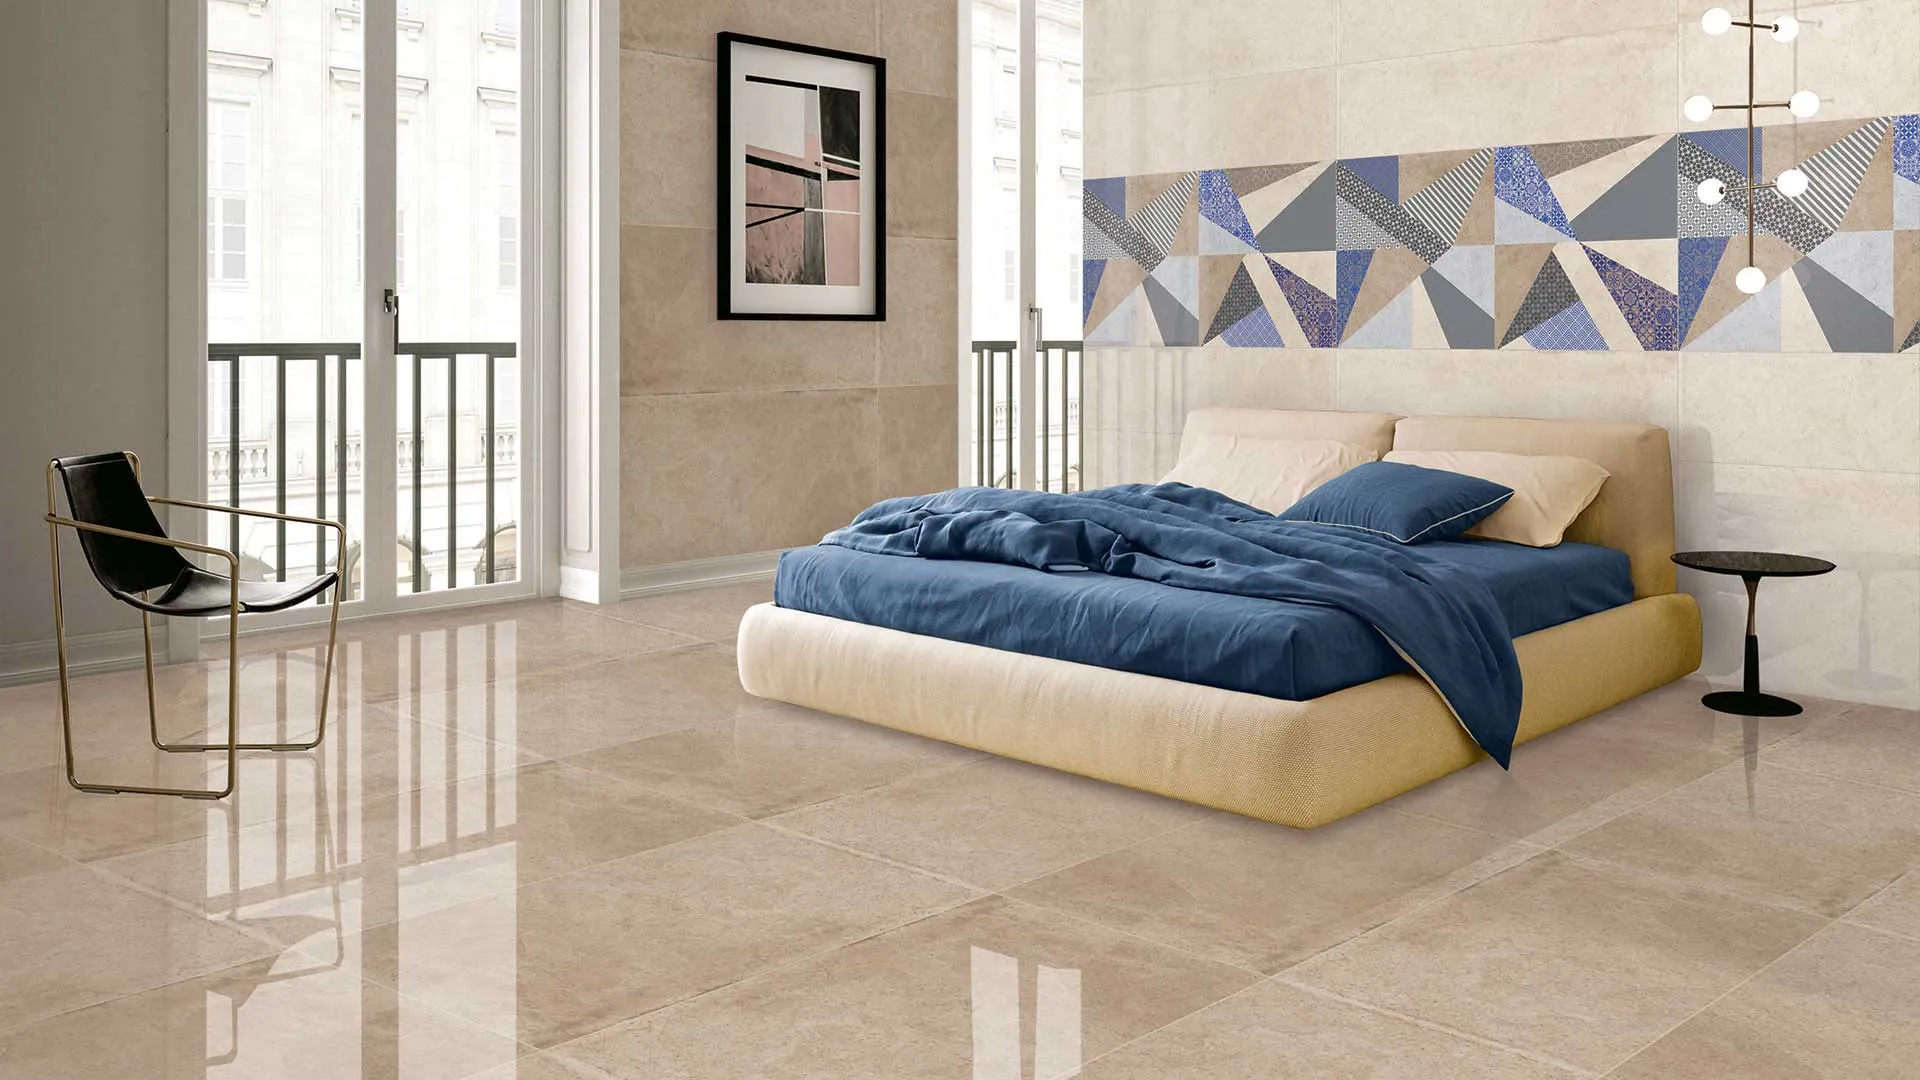 Vitrified Tiles: Durable And Versatile Flooring Options For Every Room